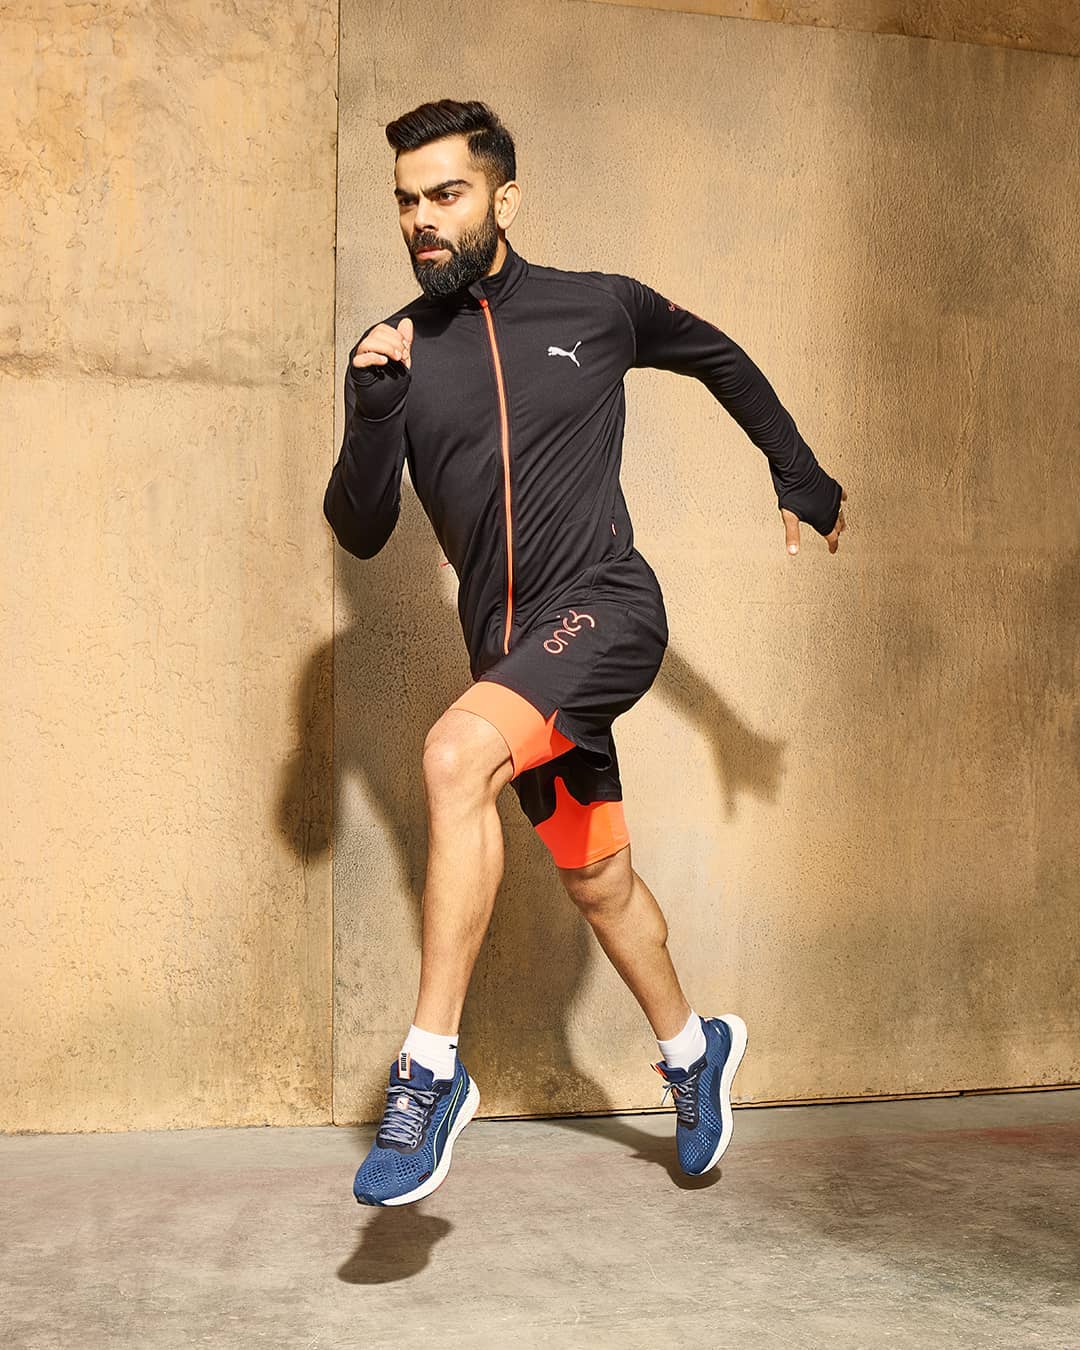 Lifestyle Store - Wherever you want to go, get there fast like @virat.kohli in Puma Speed One8, available at Lifestyle.
.
Click the link in bio to SHOP NOW or visit your nearest Lifestyle Store.
.
#Li...